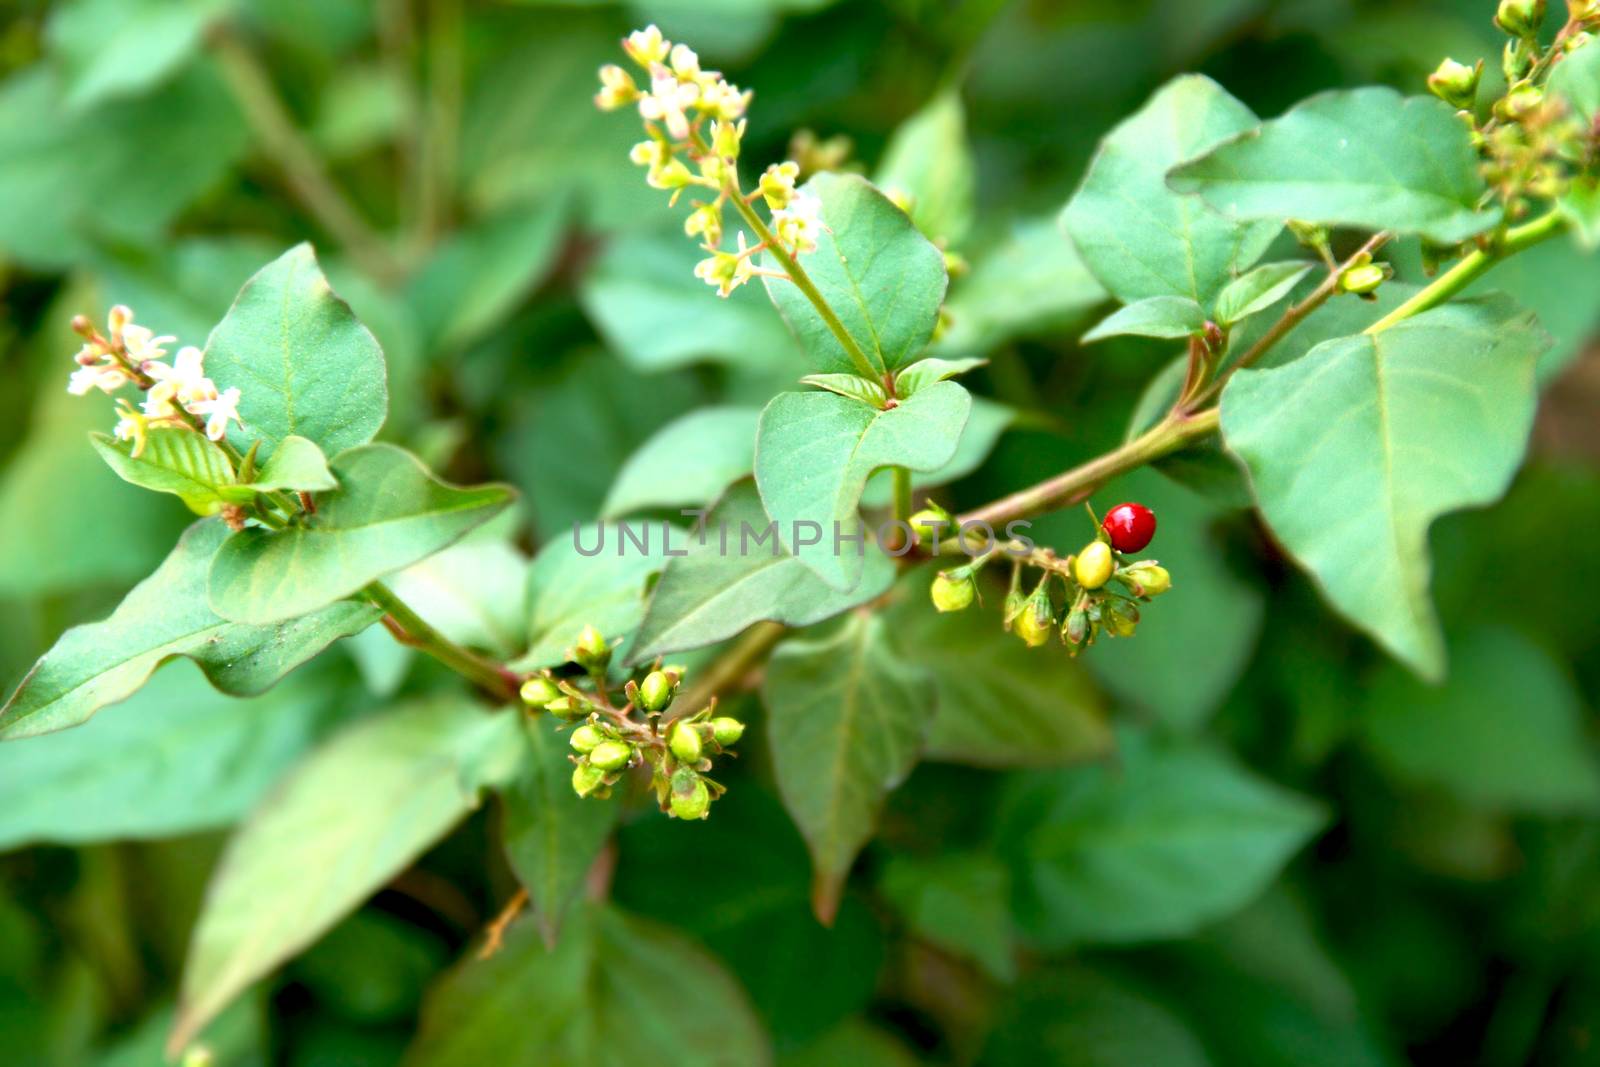 wild plant close up with hard green leaves and small white flowers and red berry